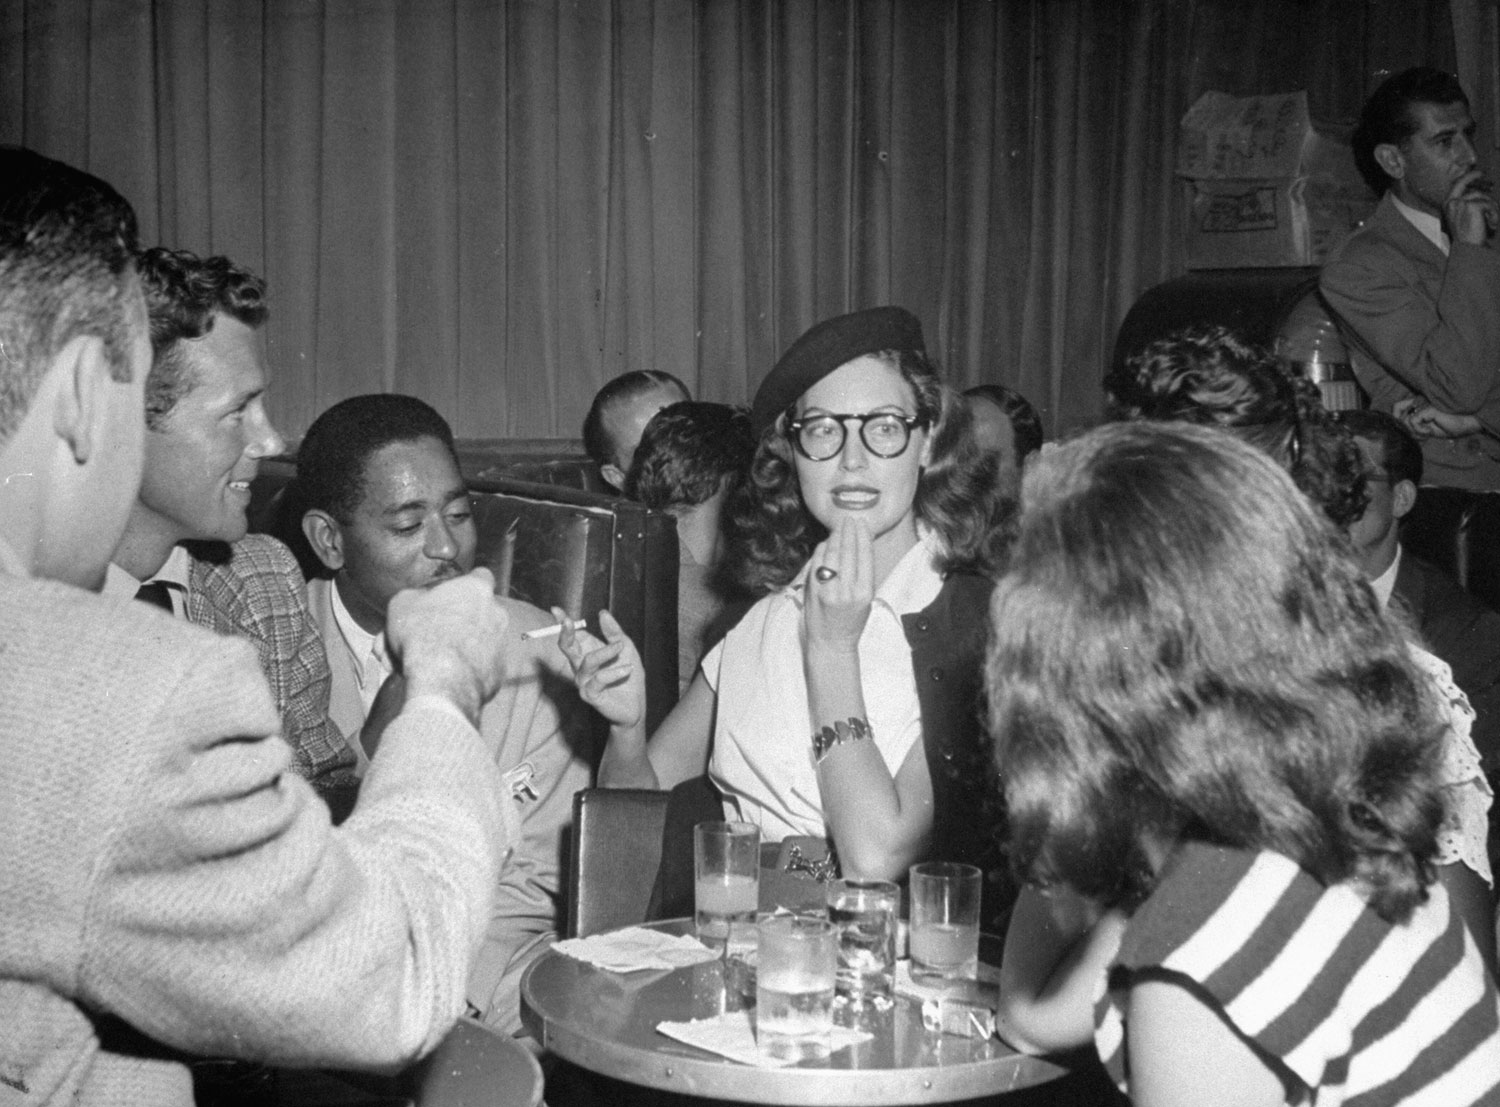 Merry actress Ava Gardner, a bop fan, dons beret and specs and pretends to wear goatee at Billy Berg's Hollywood nightclub as Dizzy (left) grins.